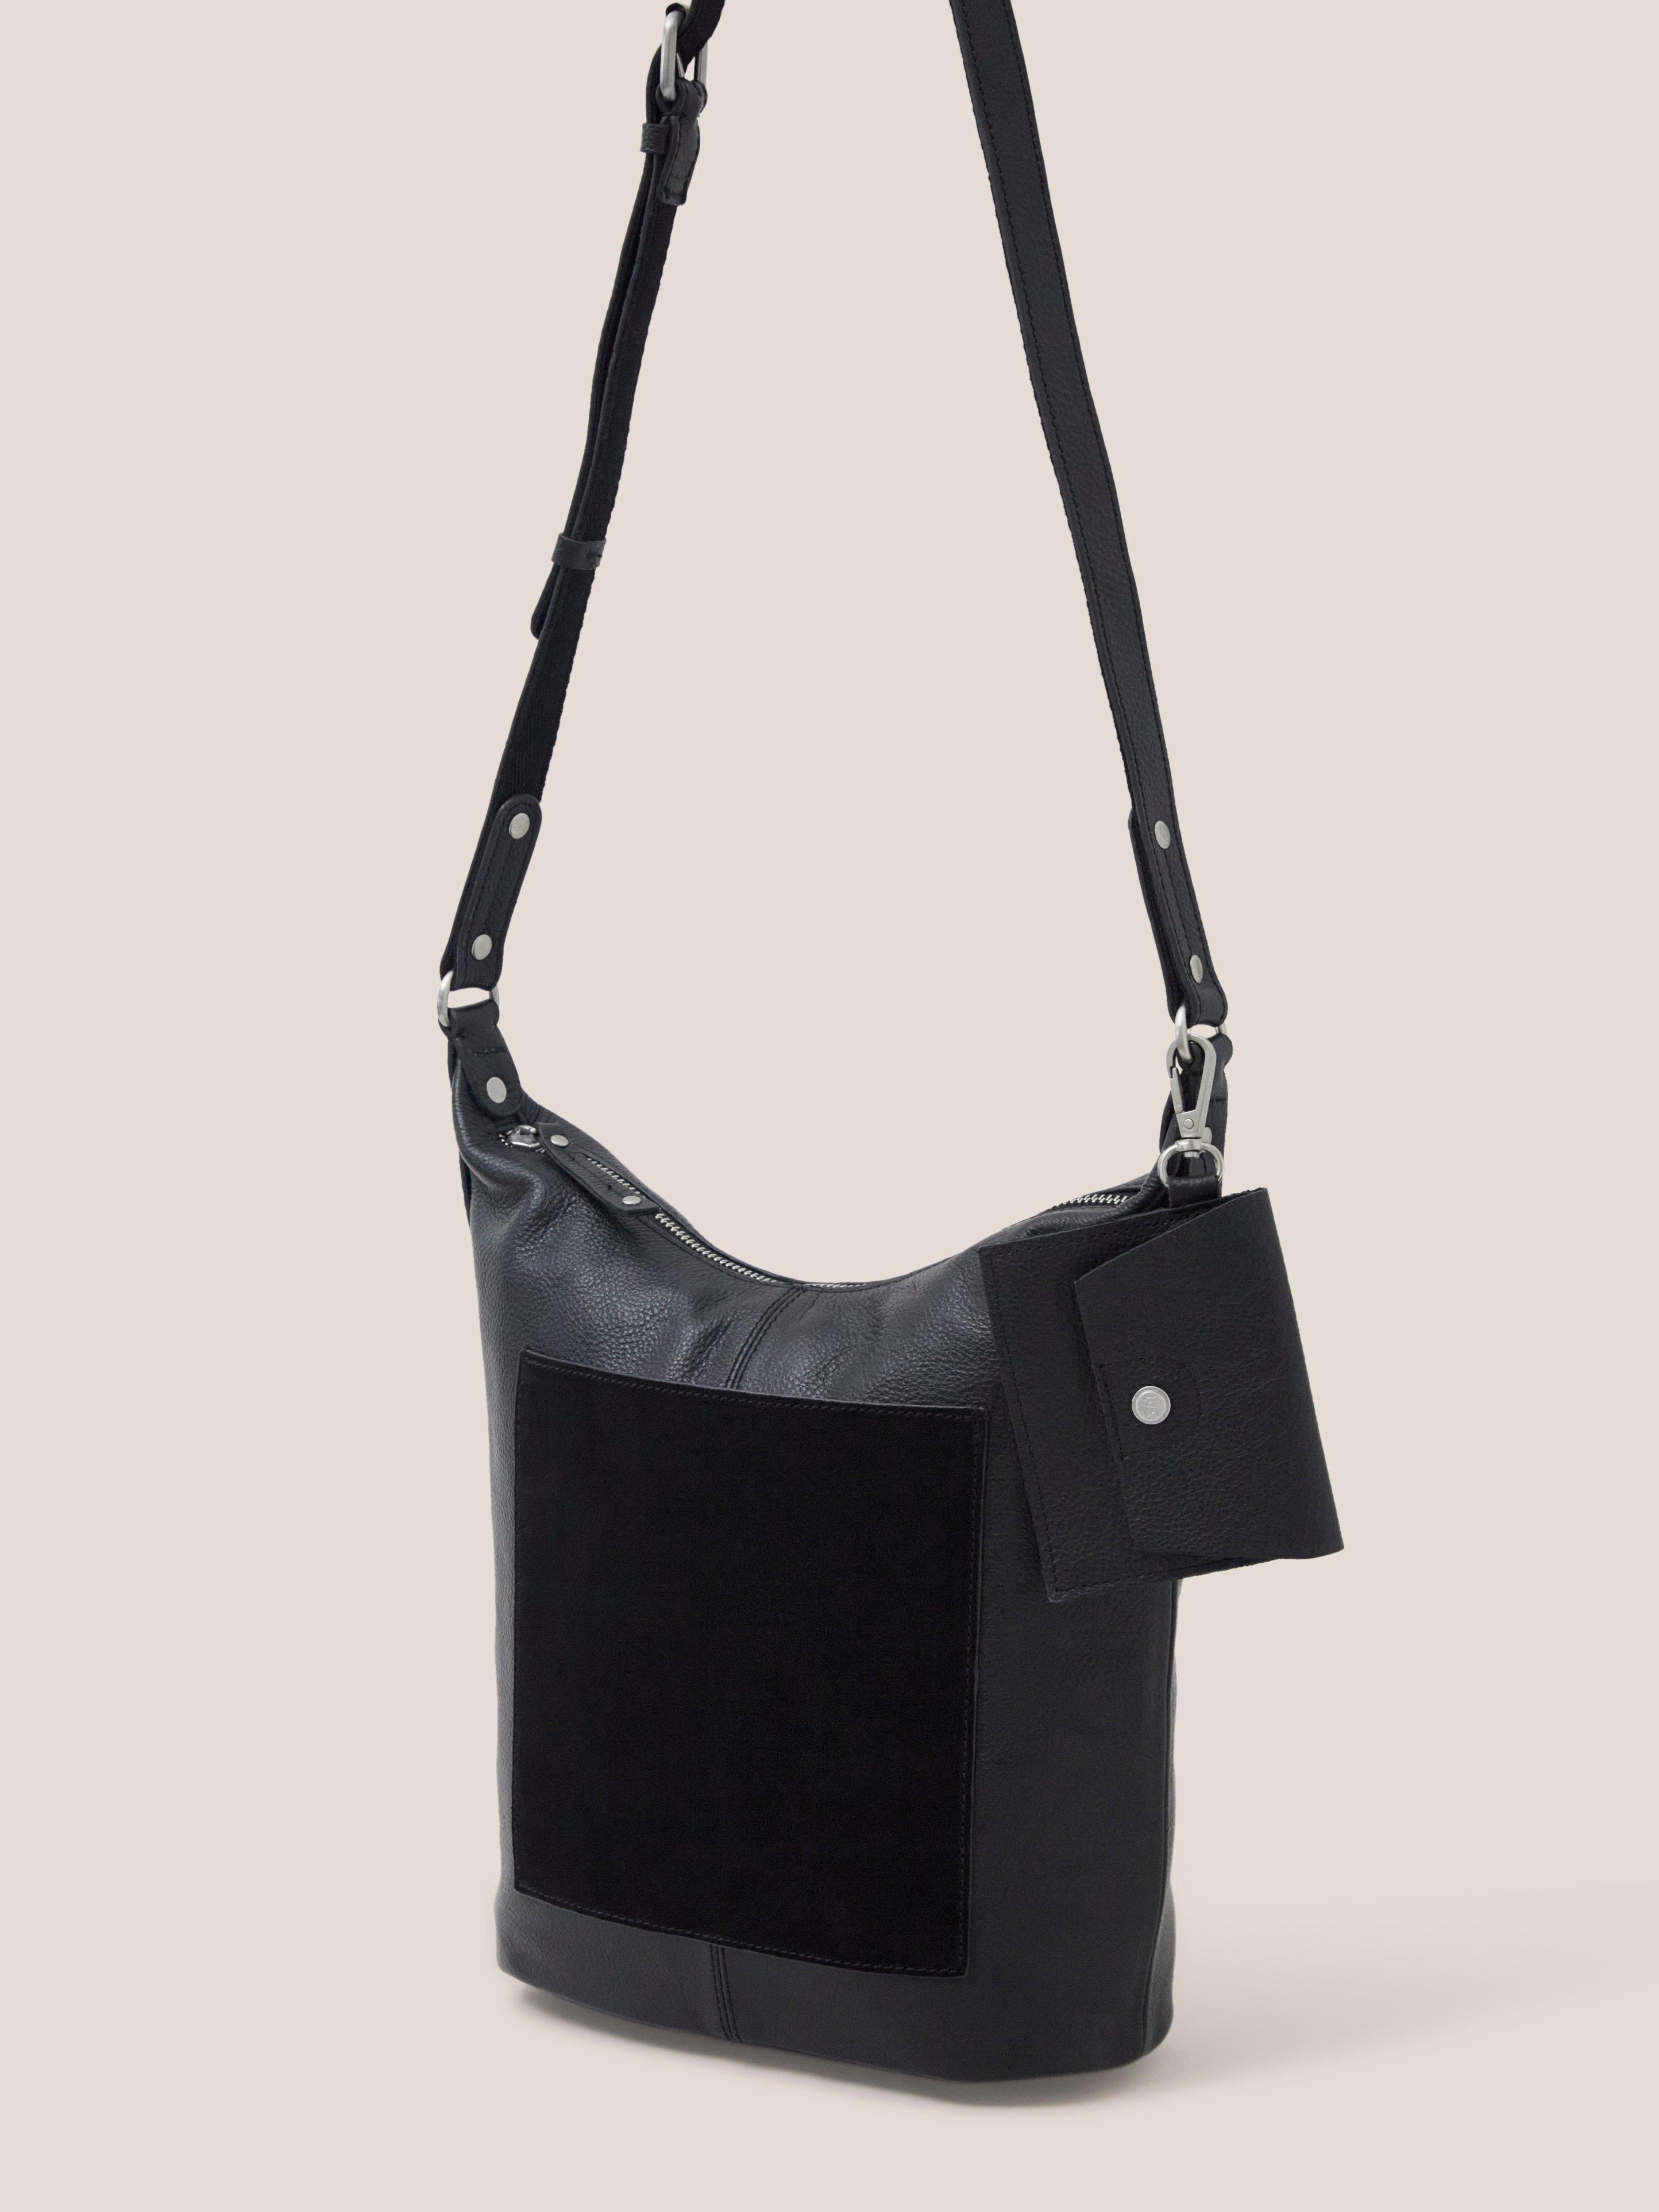 Fern Leather Casual Crossbody Bag in PURE BLK - MODEL FRONT